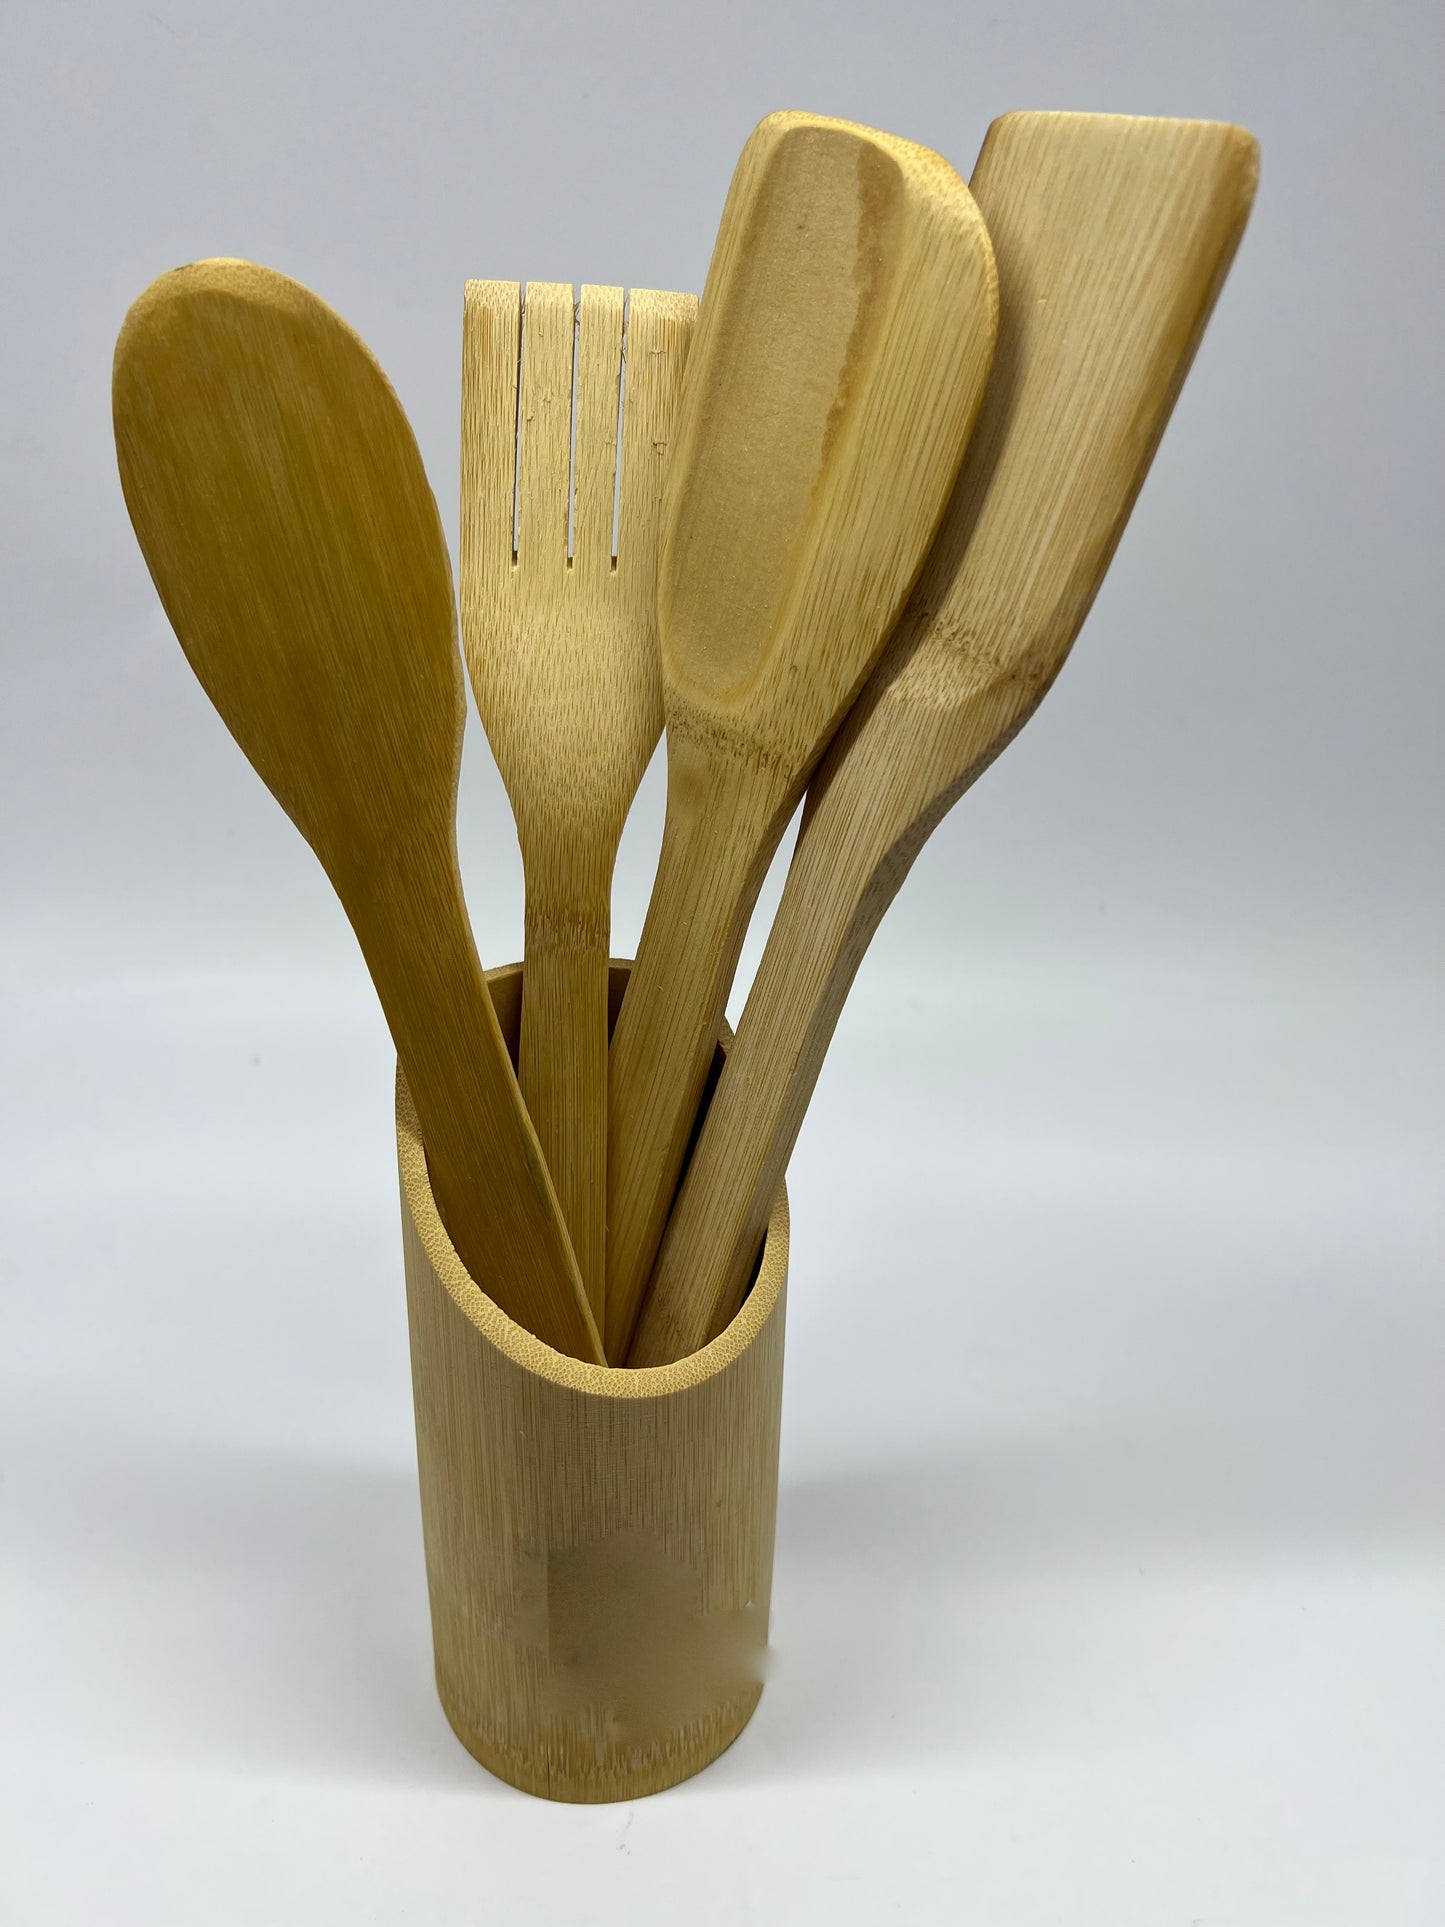 Wooden Spoons And Holder